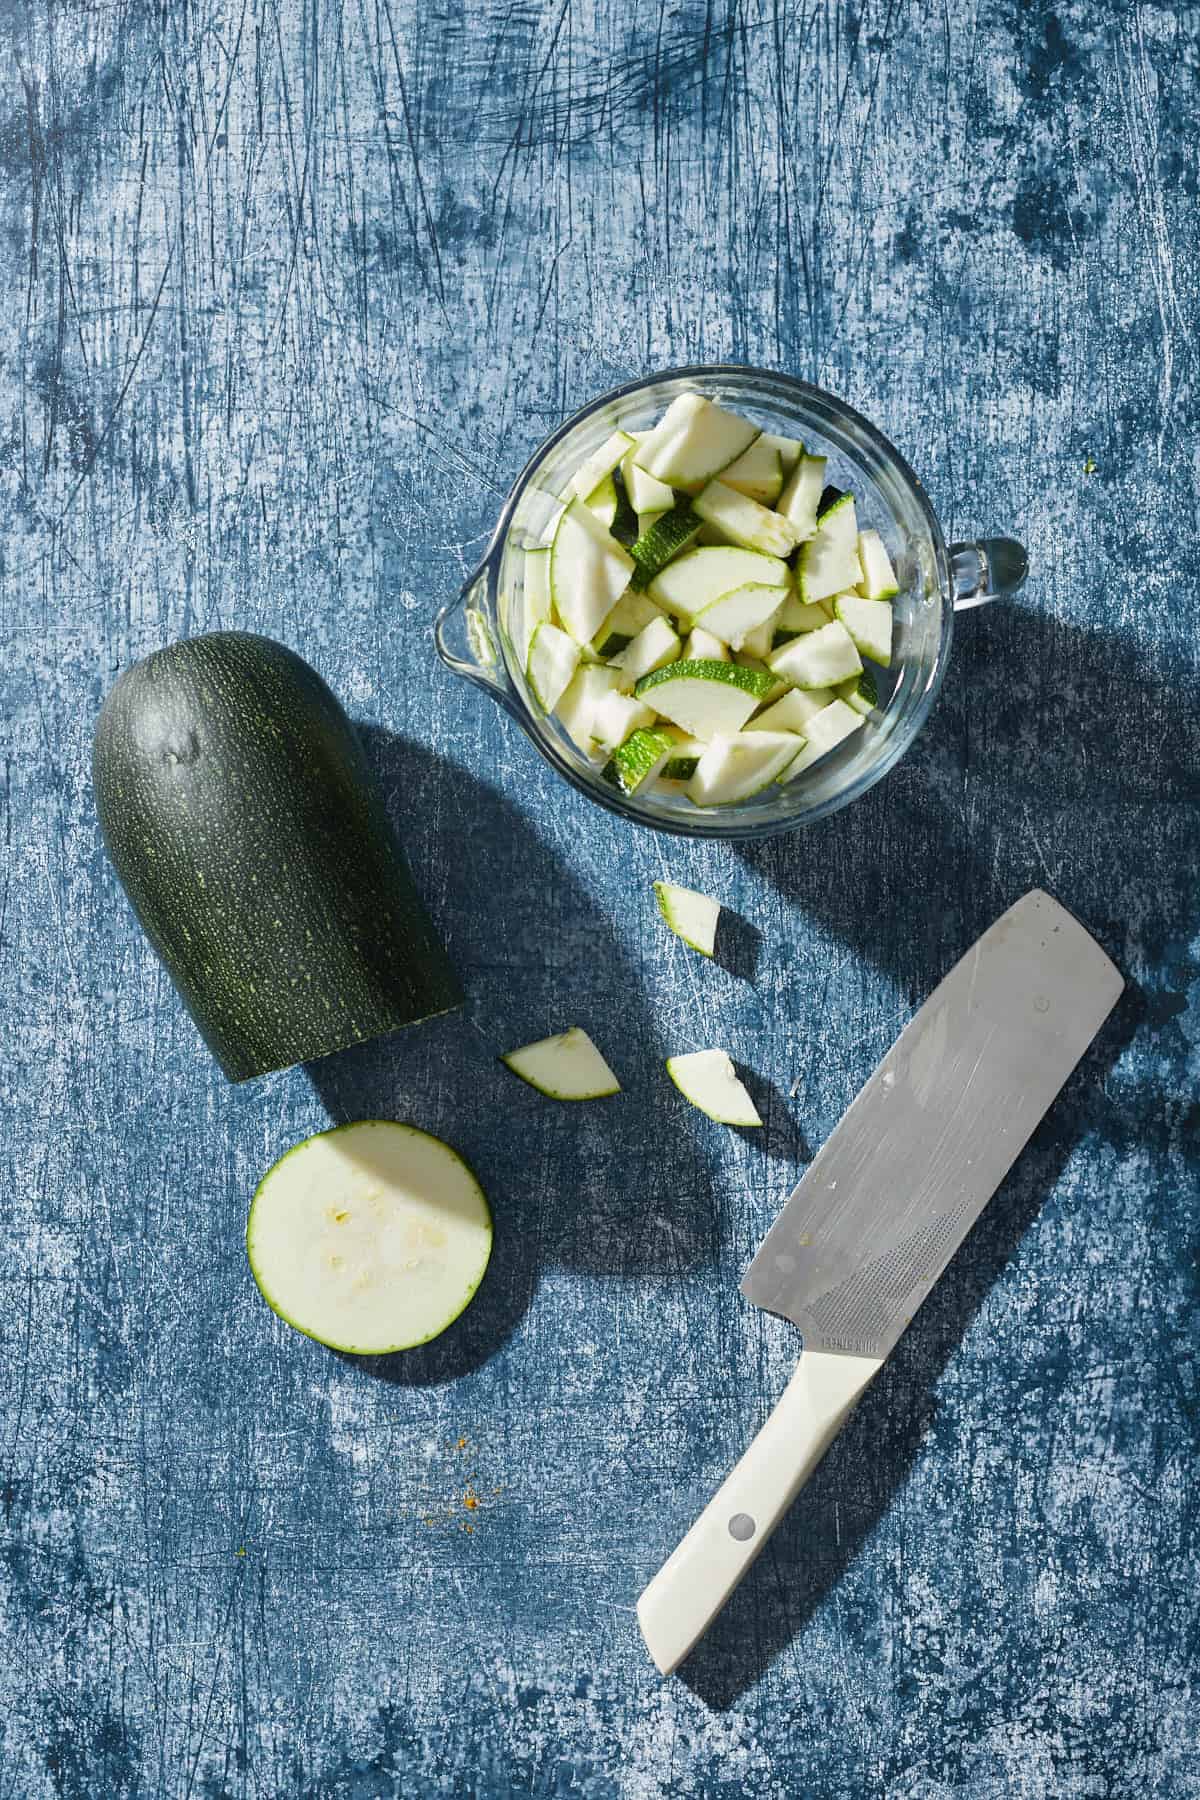 a large zucchini with chopped up pieces and a chef's knife